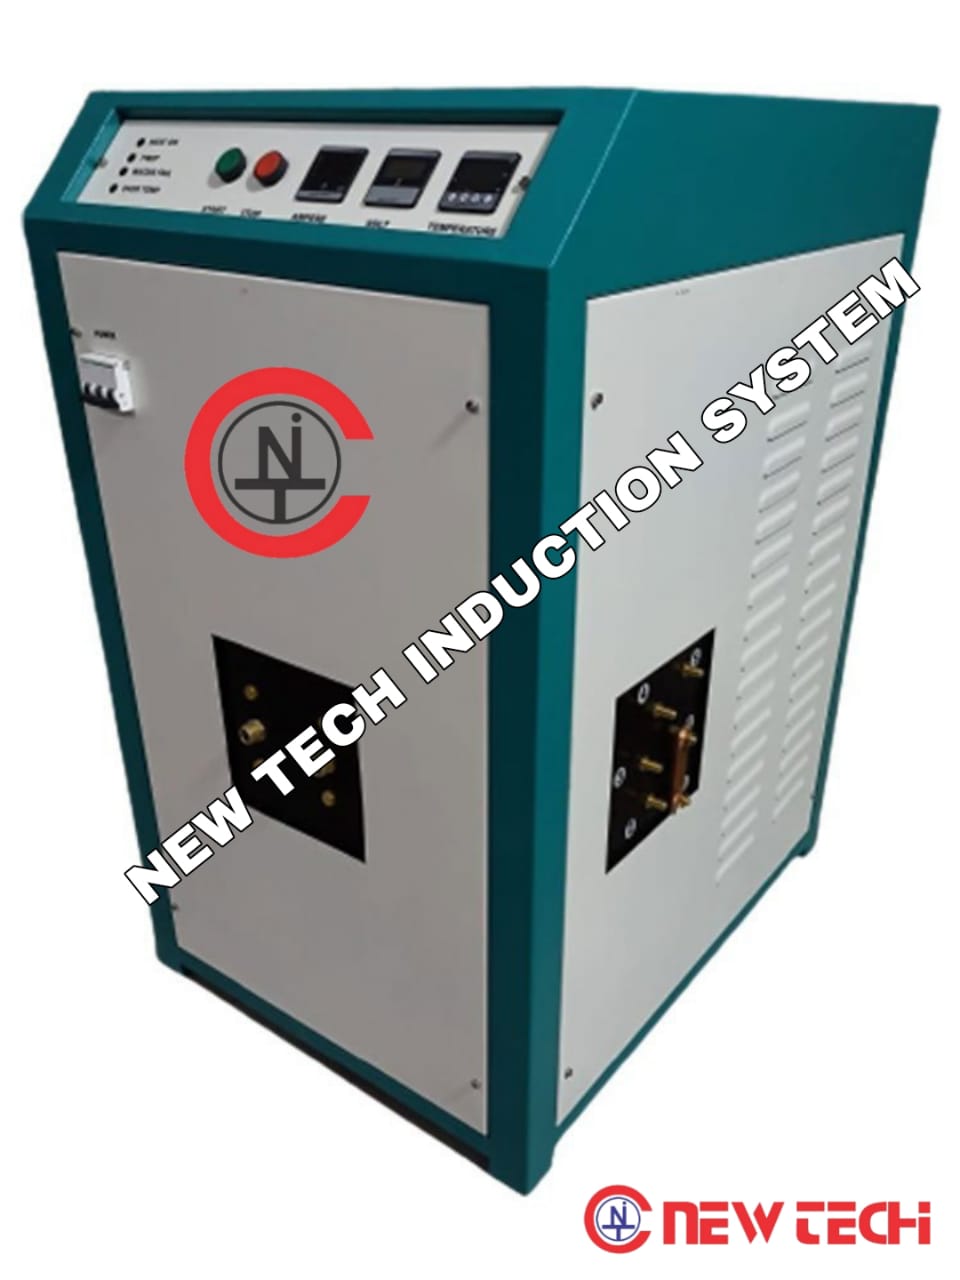 Gold Melting Induction Machine Manufacturers In Jammu And Kashmir